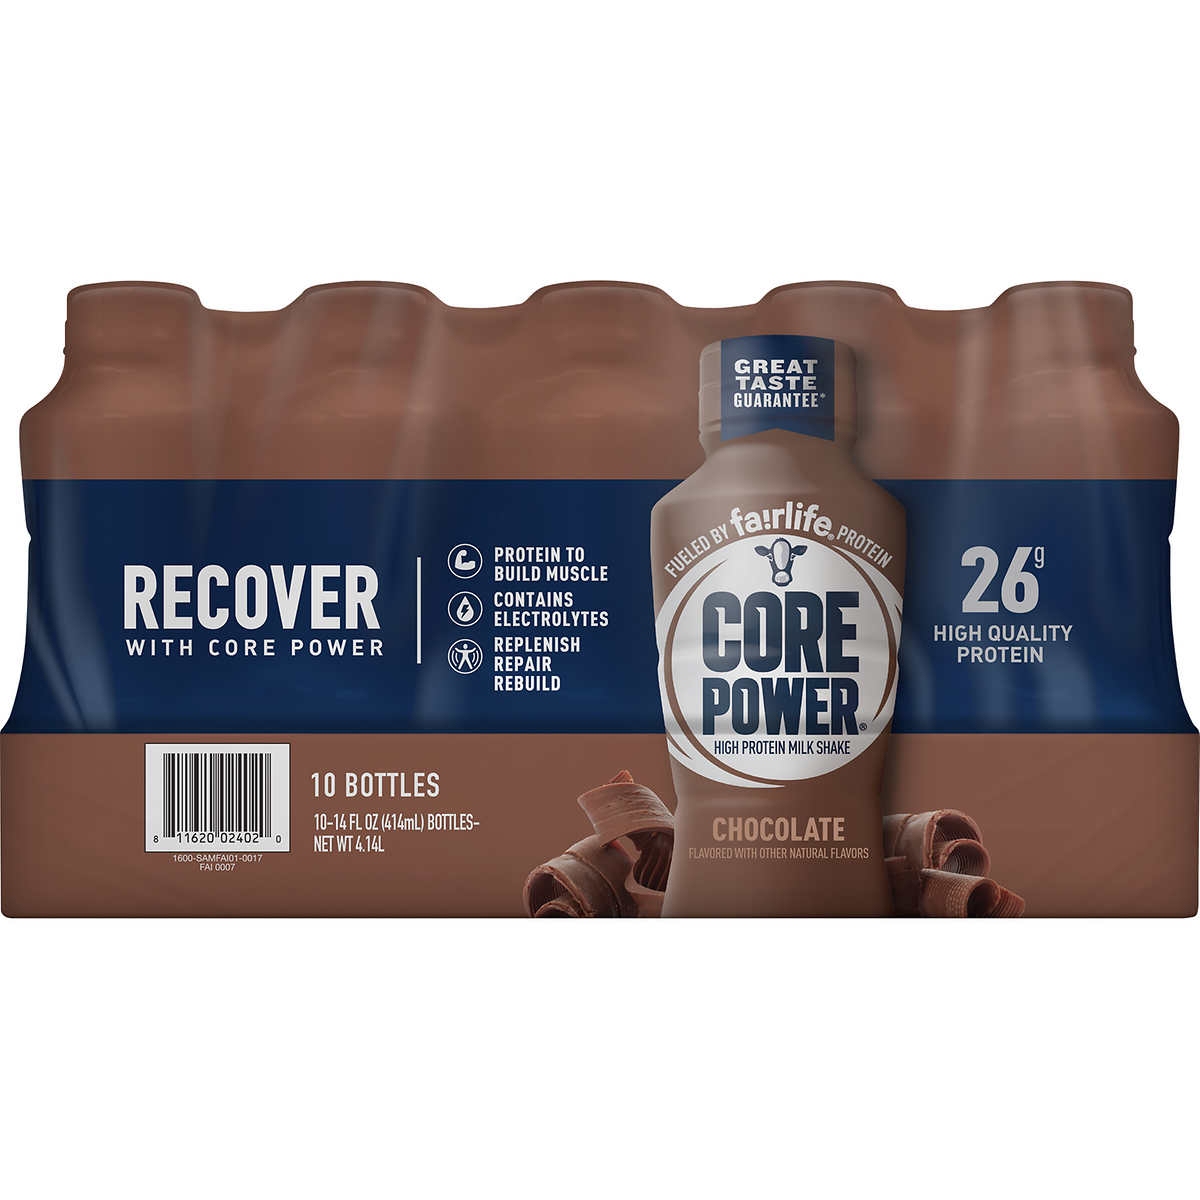 Fairlife Core Power High Protein Shake, Chocolate, 14 Fluid Ounce (Pack Of 10)